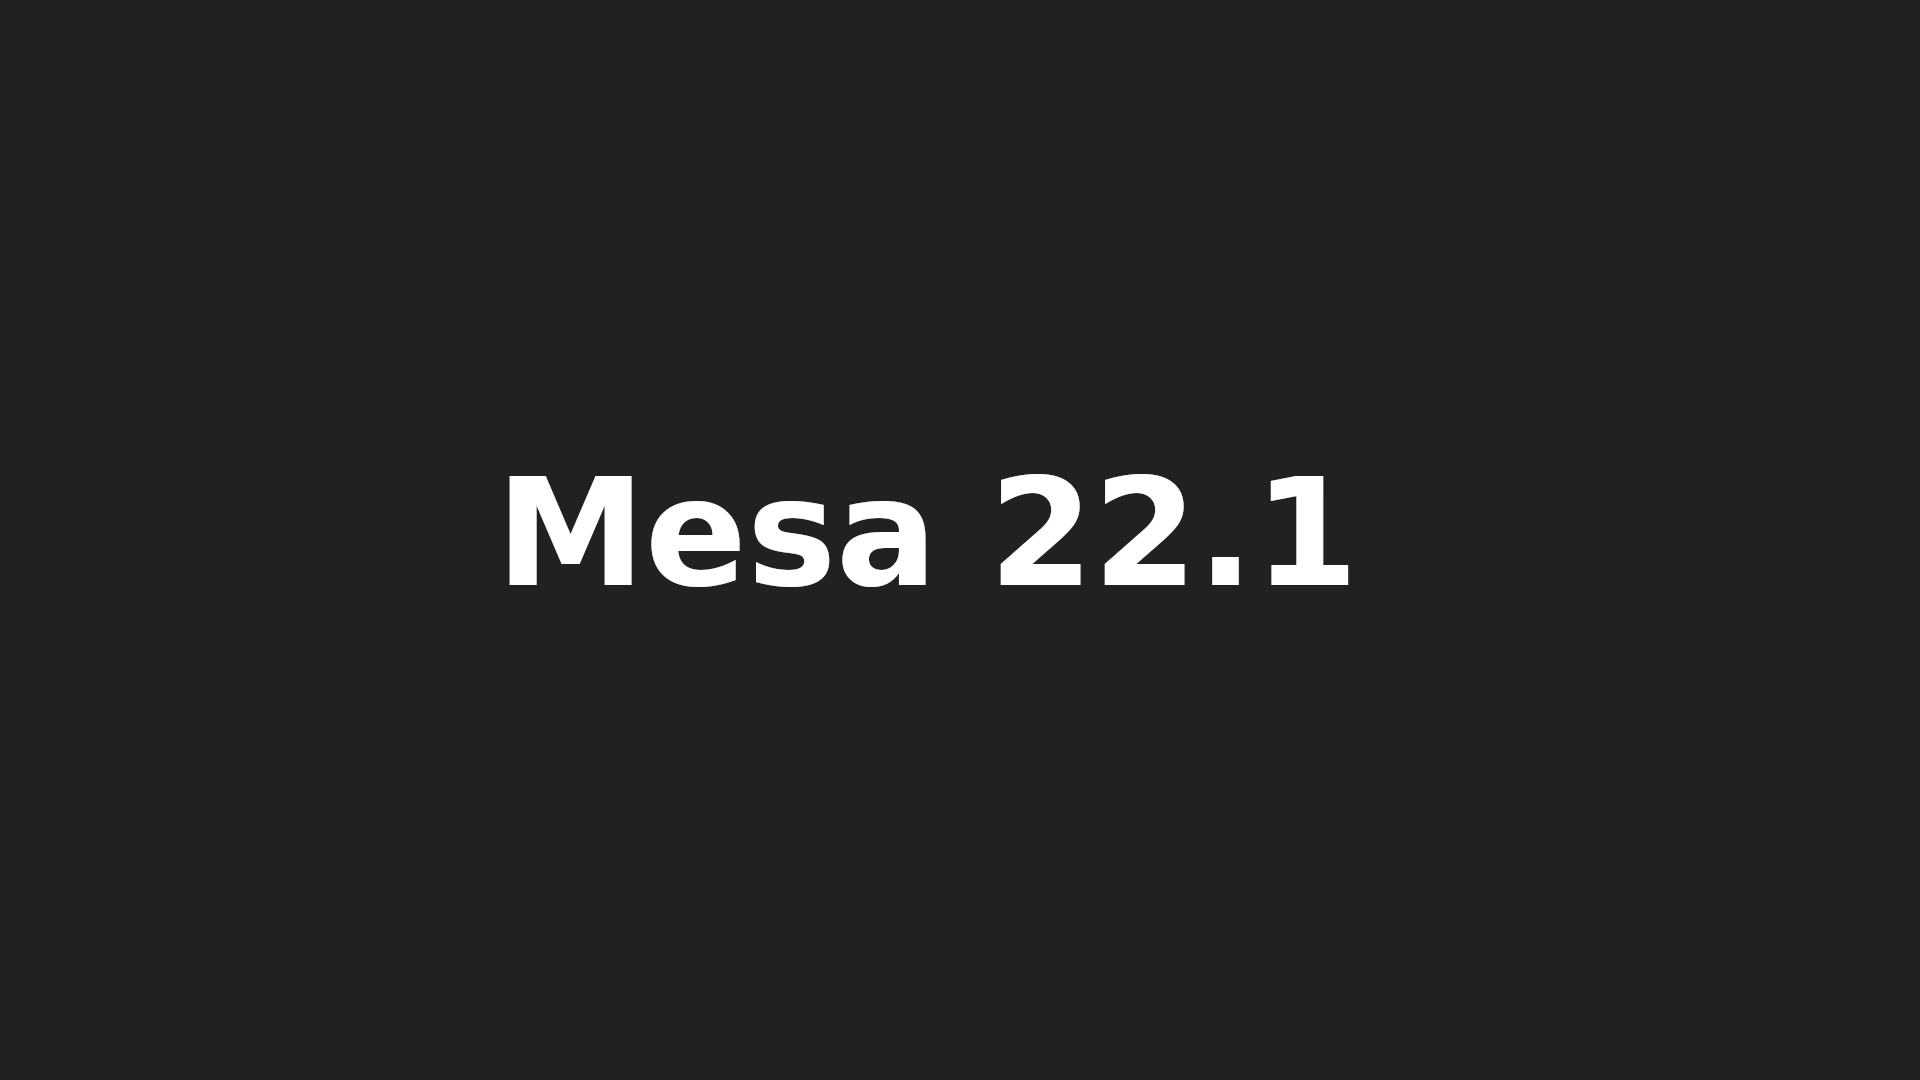 Mesa 22.1 Released with Improvements for Elden Ring, Apex Legends, Zink, and More